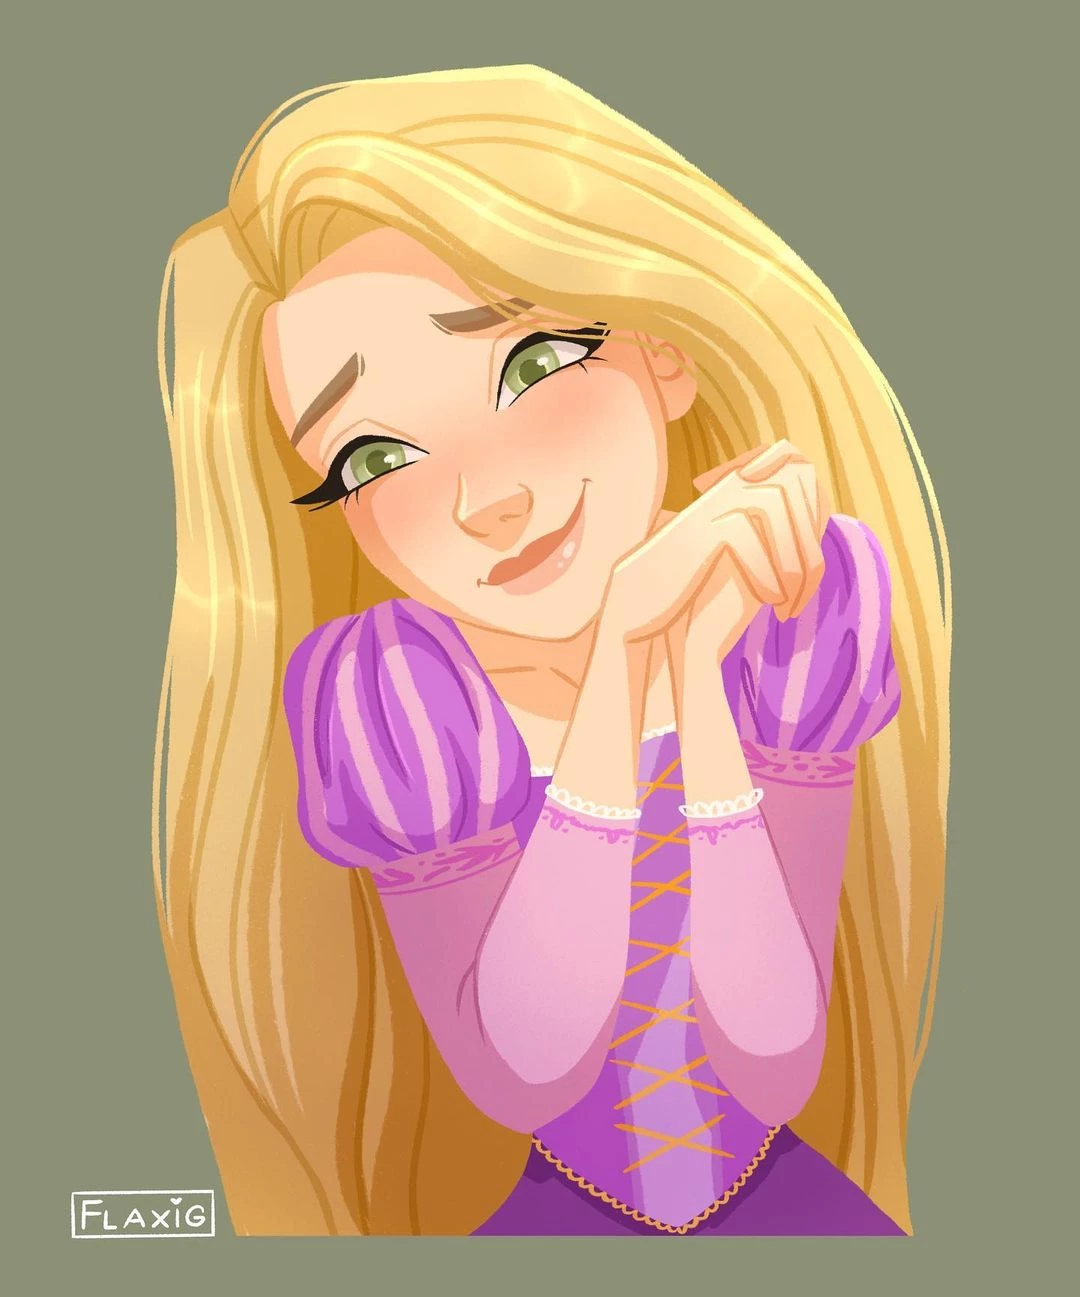 A More Mellow Siight Of Rapunzel (Tangled)